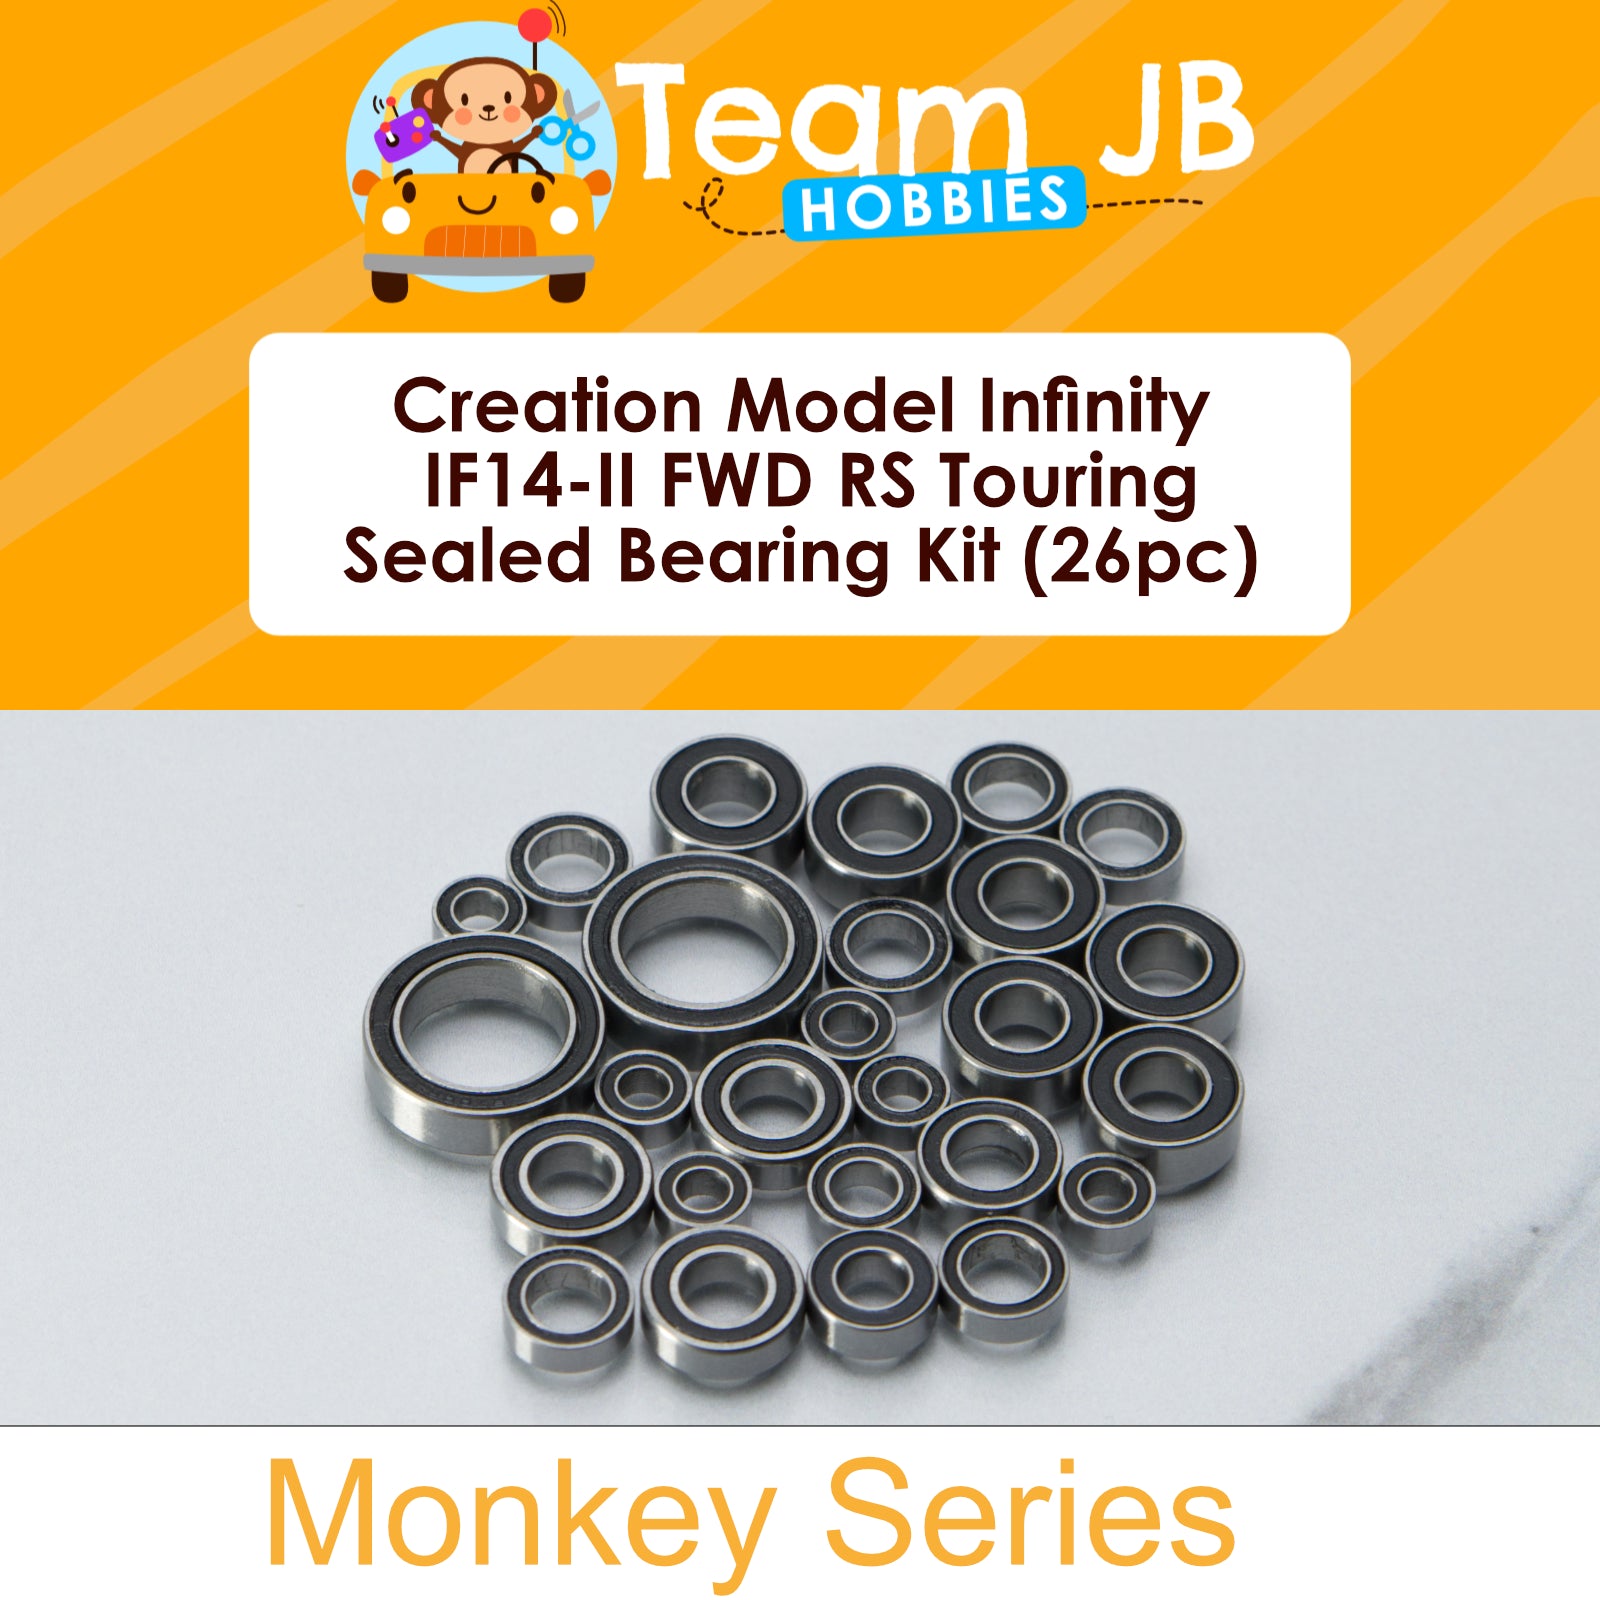 Creation Model Infinity IF14-II FWD RS Touring - Sealed Bearing Kit